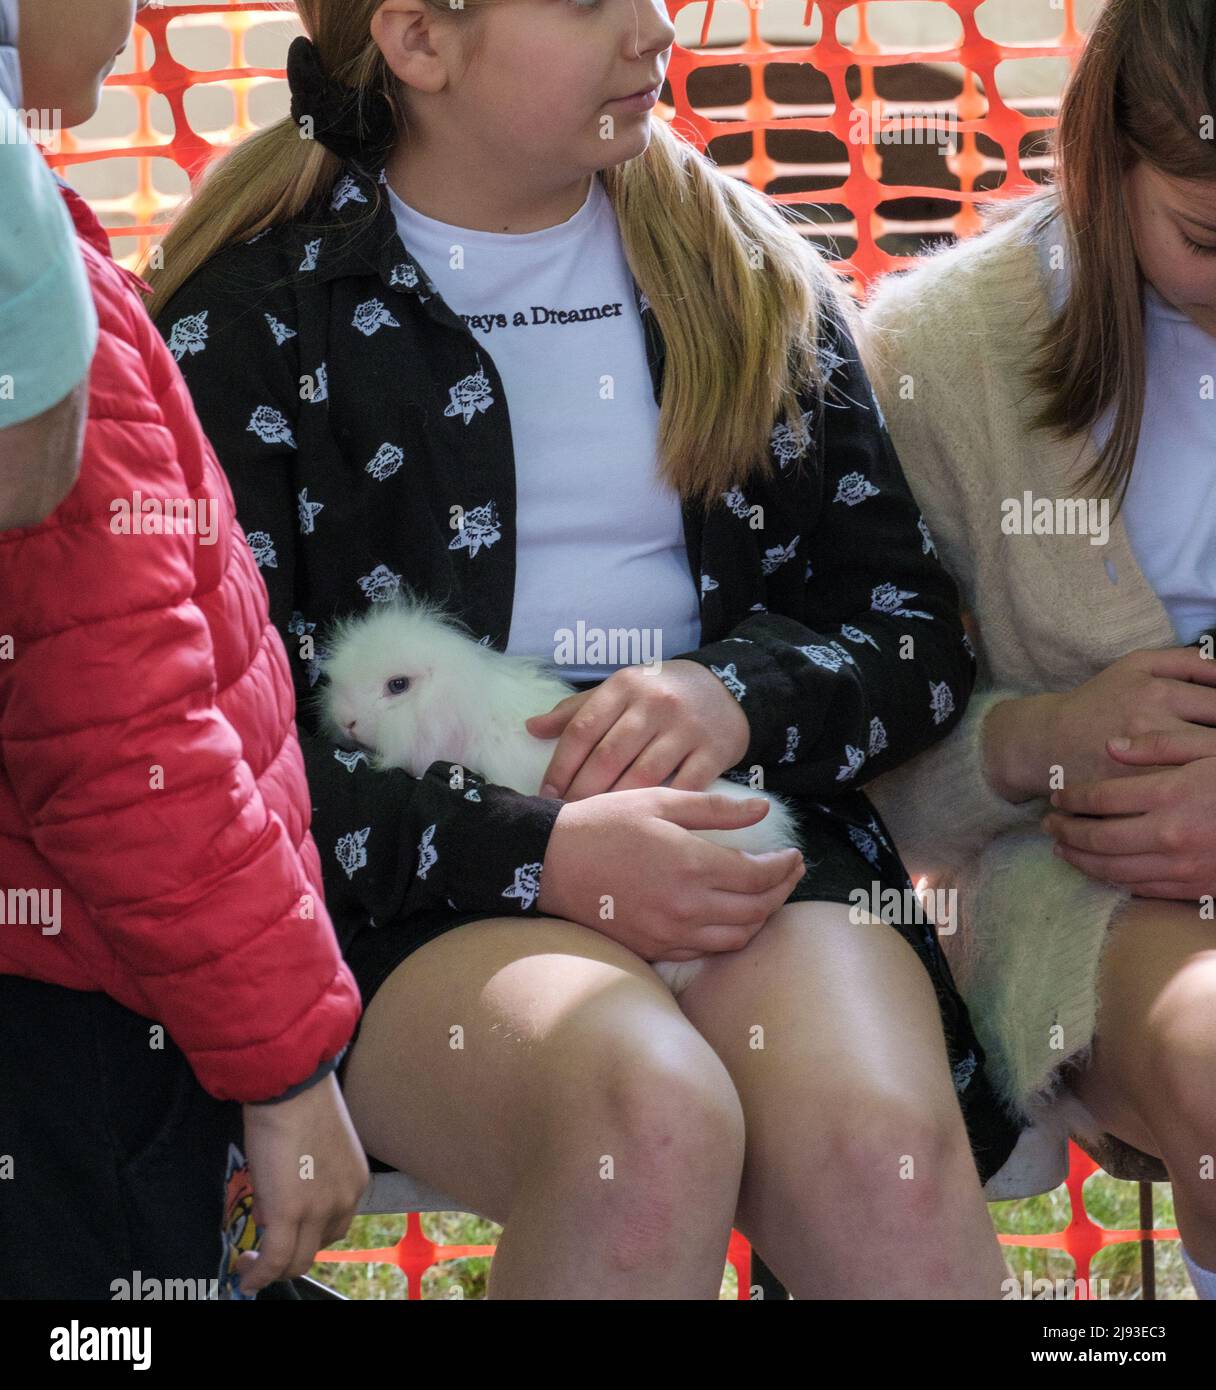 Girl cuddles small white furry animal on her lap while young boy looks on at a petting zoo during 2022 St George’s Day Celebration. Pinner, London. Stock Photo